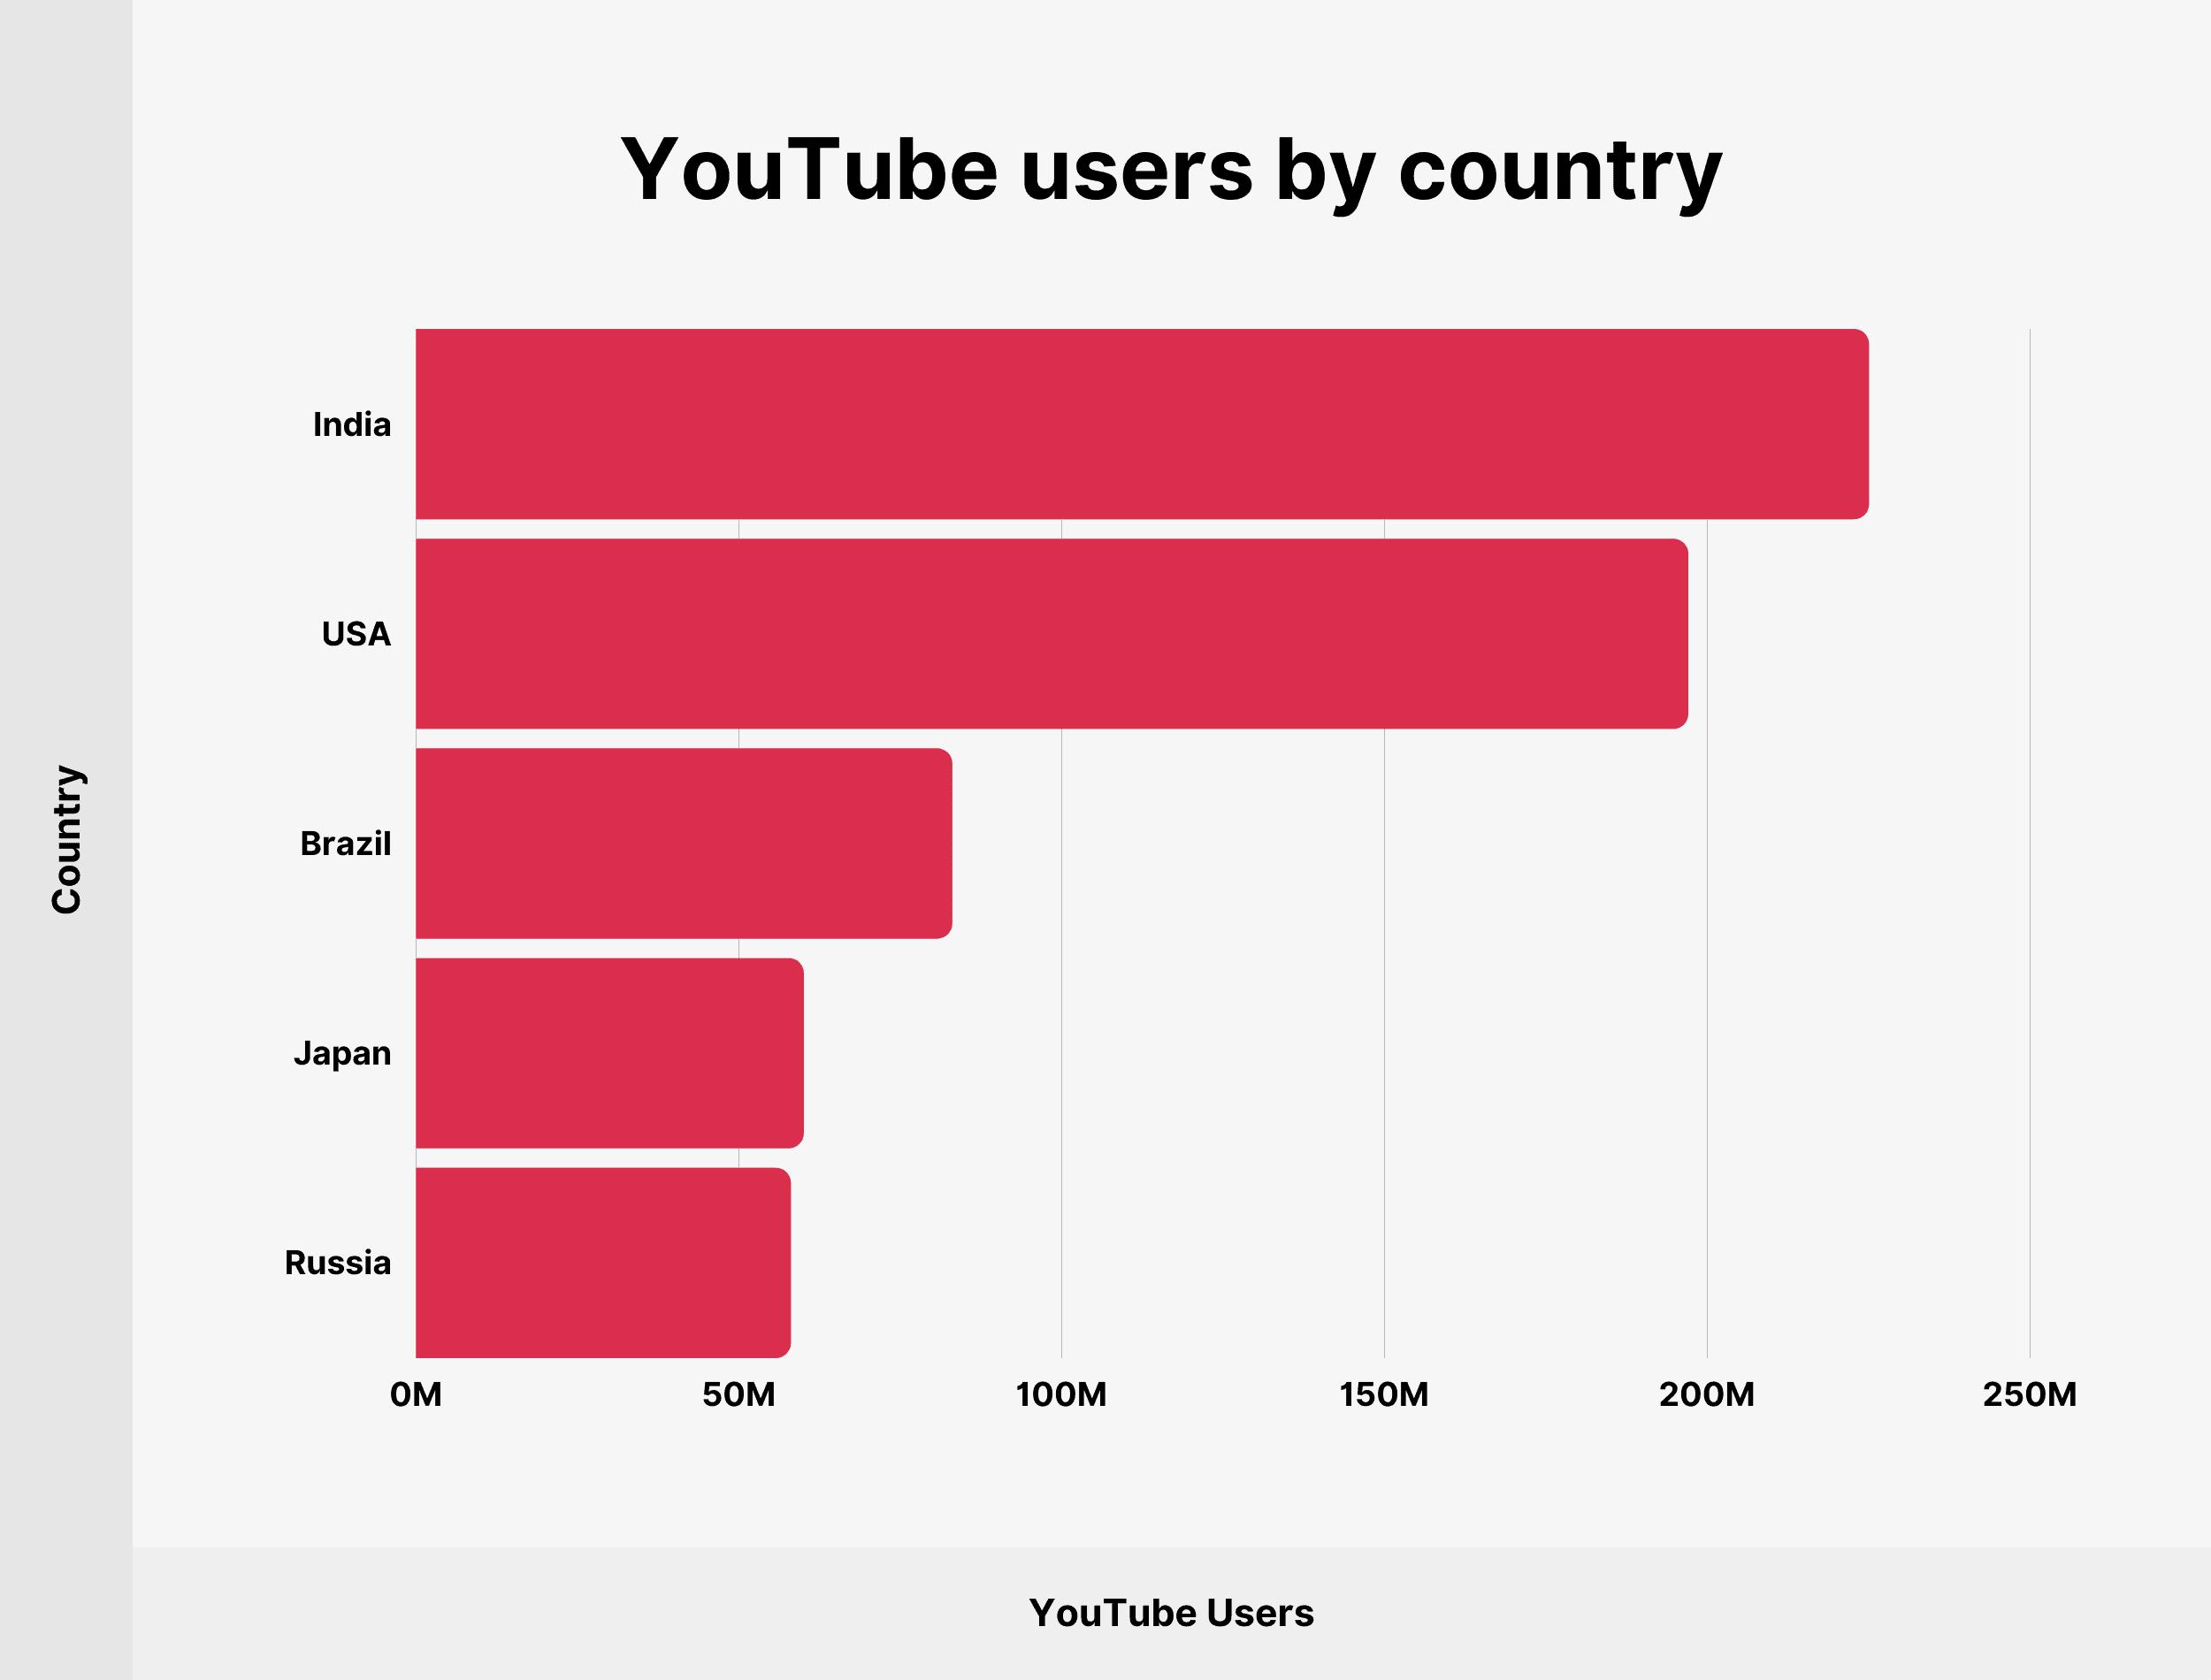 Total YouTube views by country